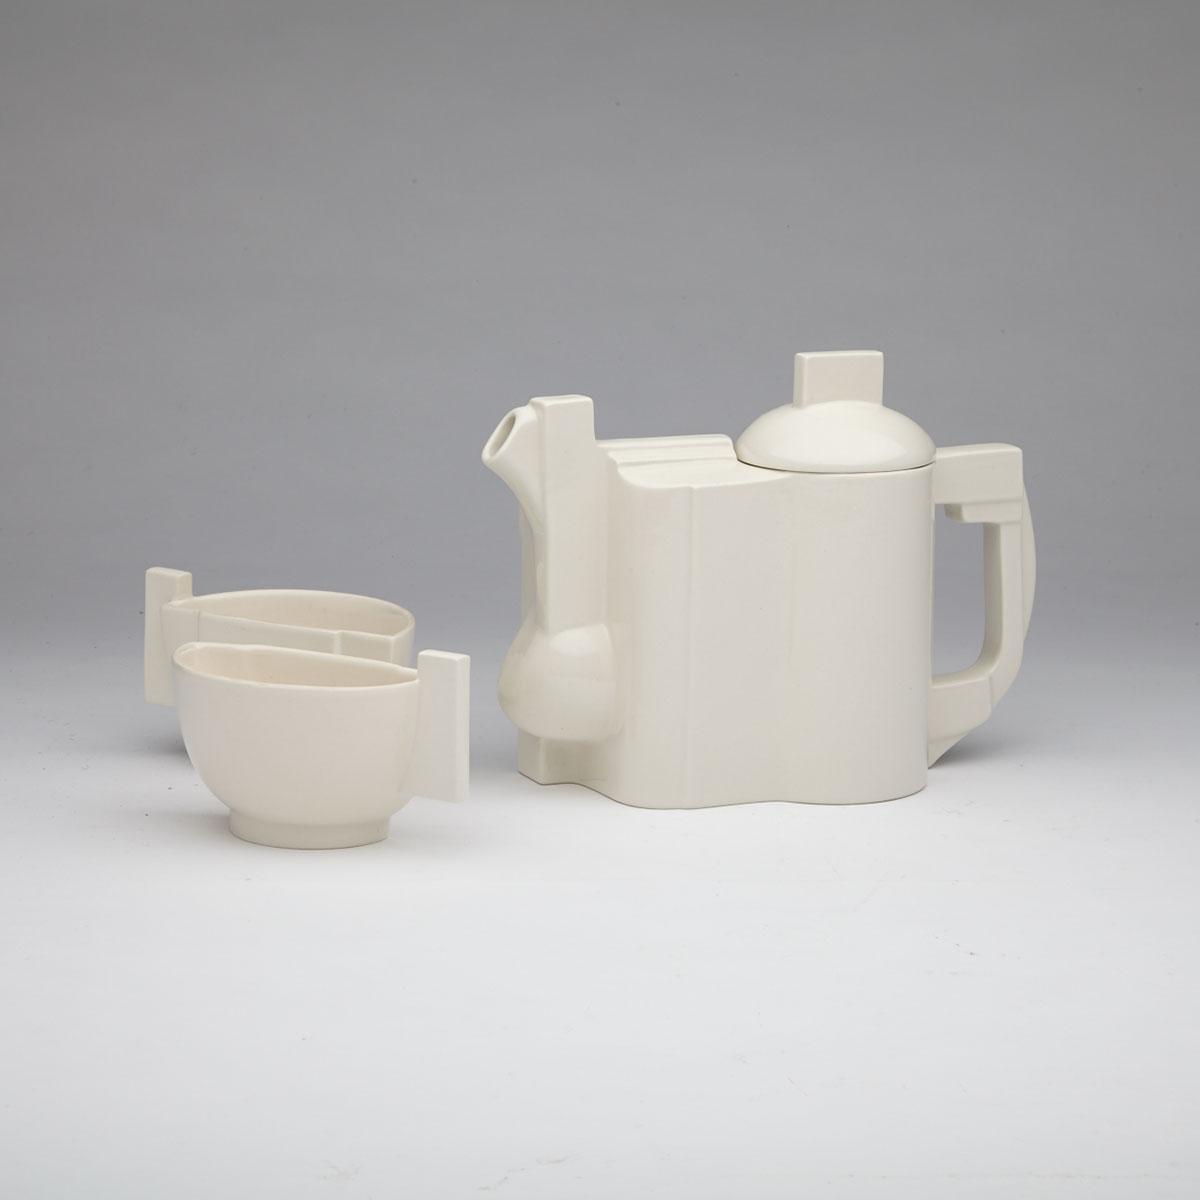 White-Glazed Earthenware ‘Suprematist’ Teapot and Two Cups, after Kazimir Malevich, 20th century